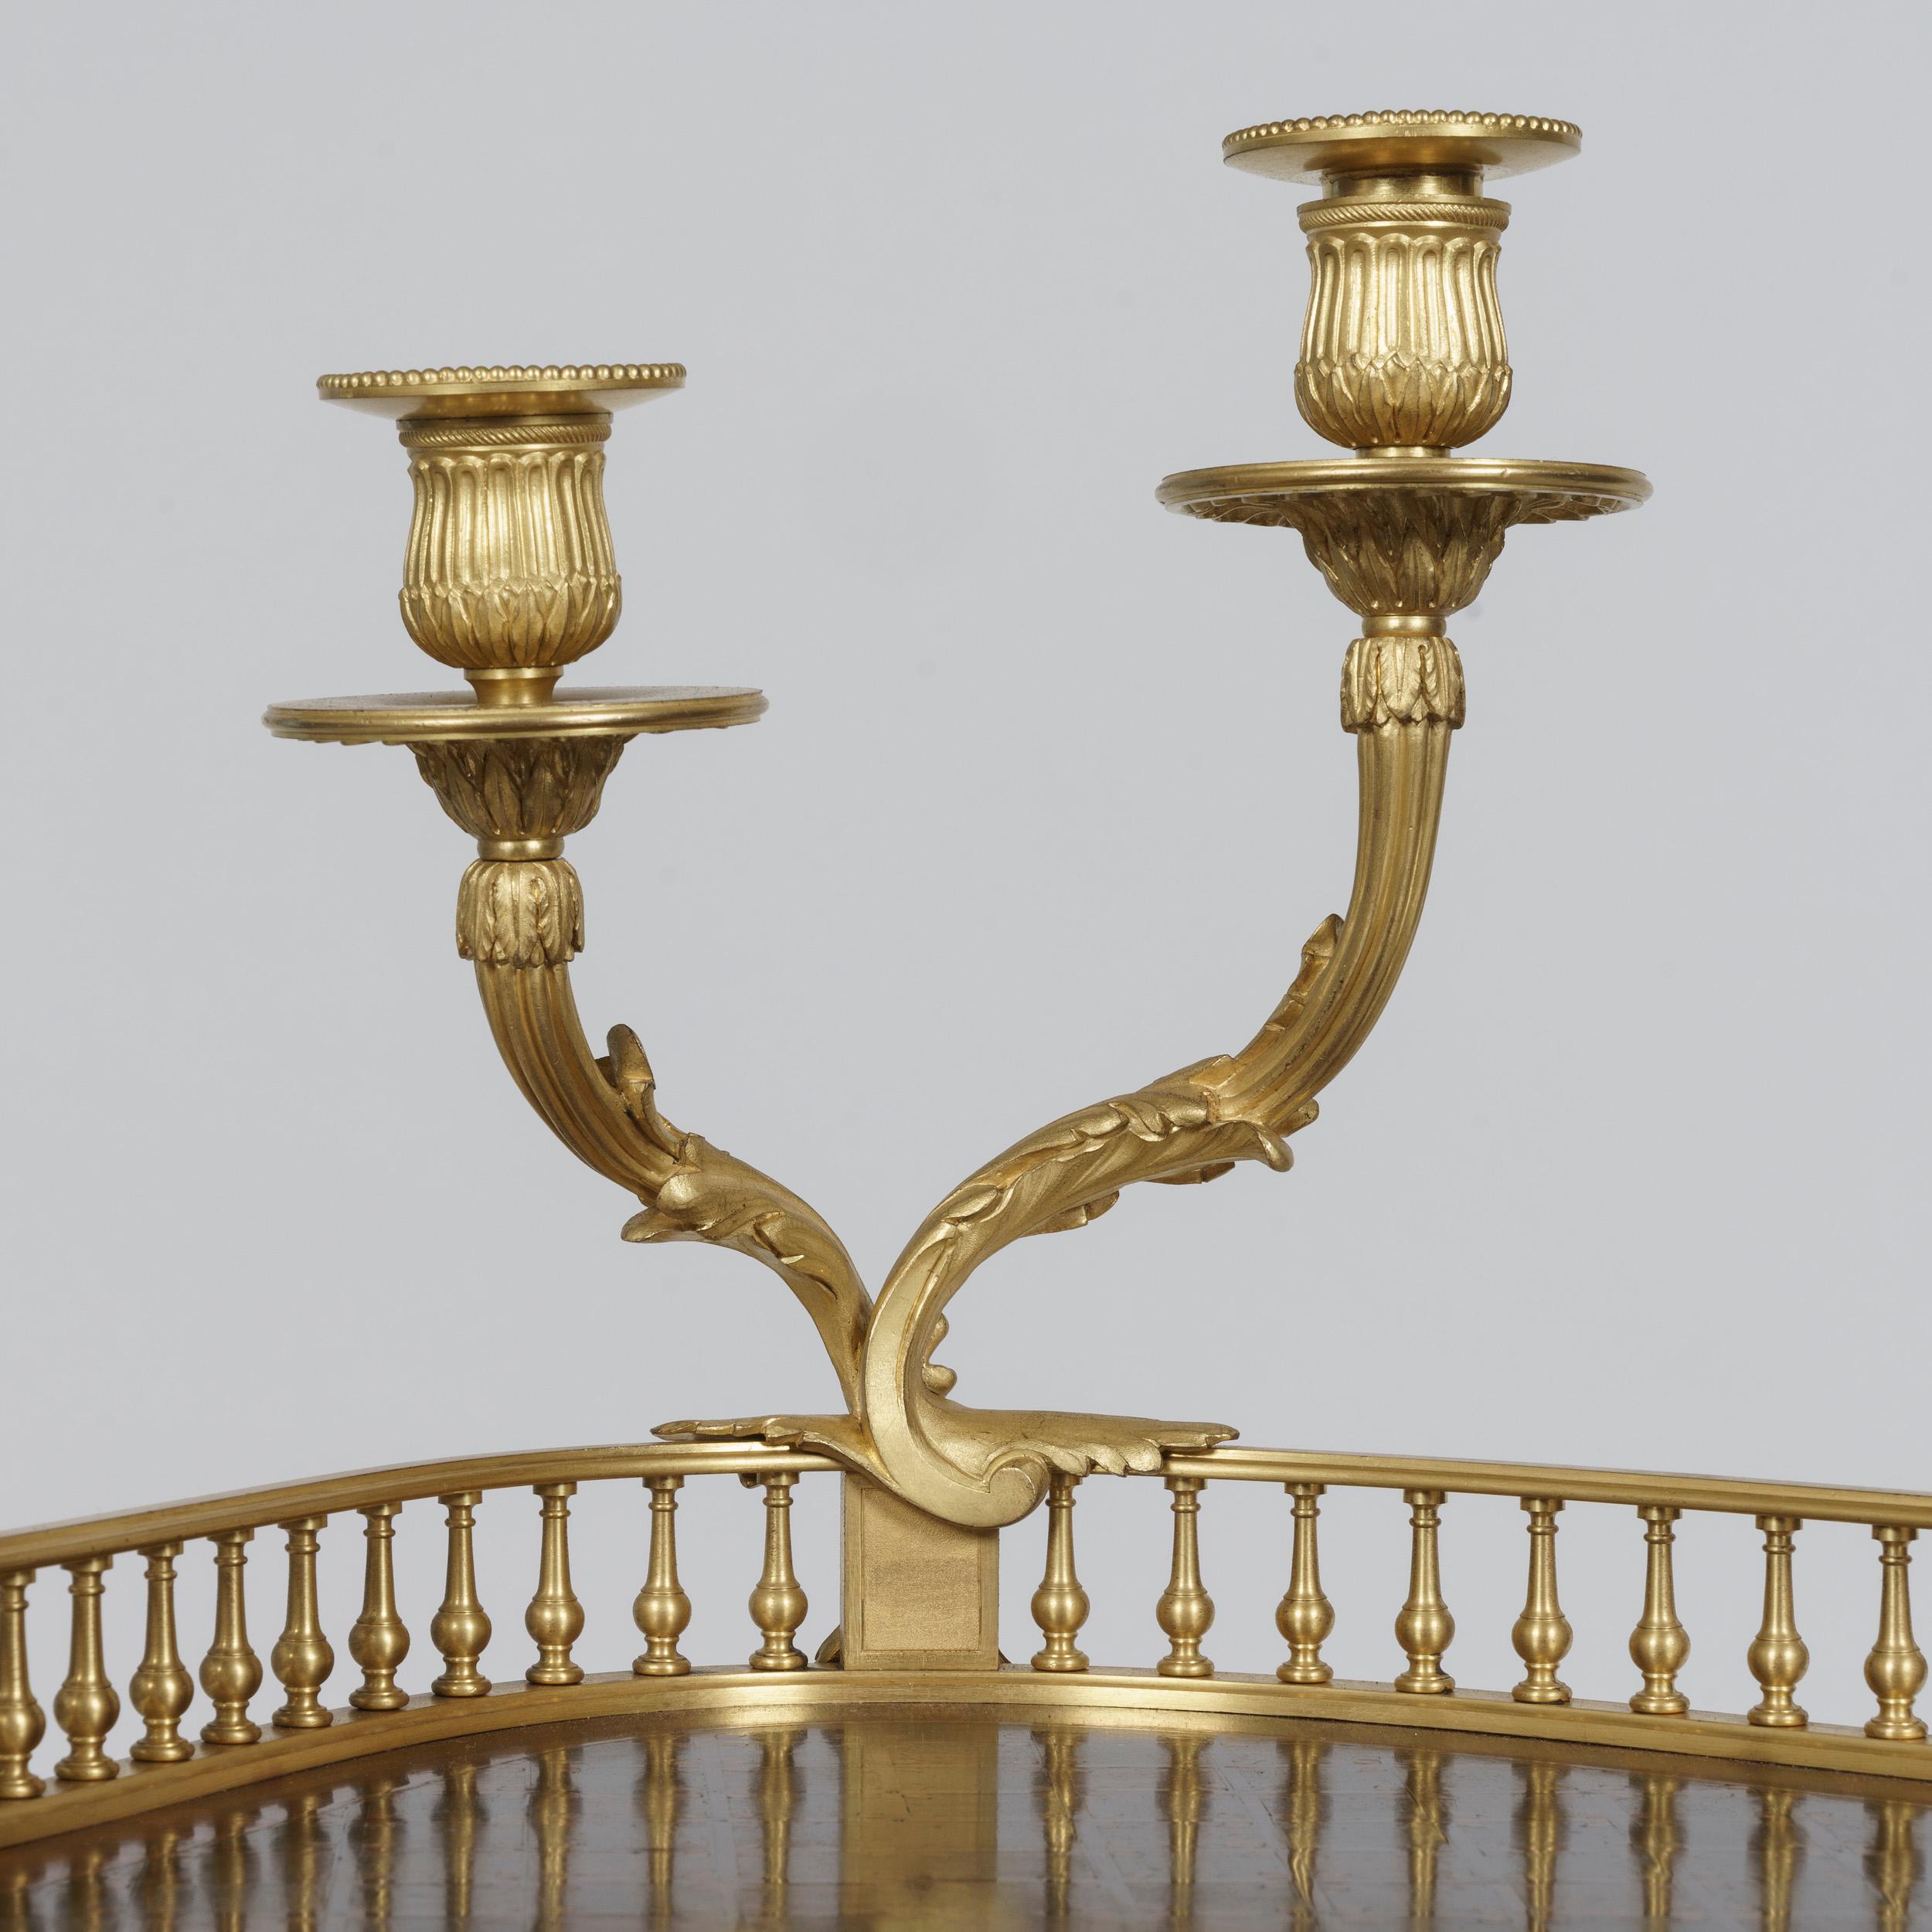 19th Century Ormolu-Mounted Table in the Louis XV Style by Maison Sormani In Good Condition For Sale In London, GB